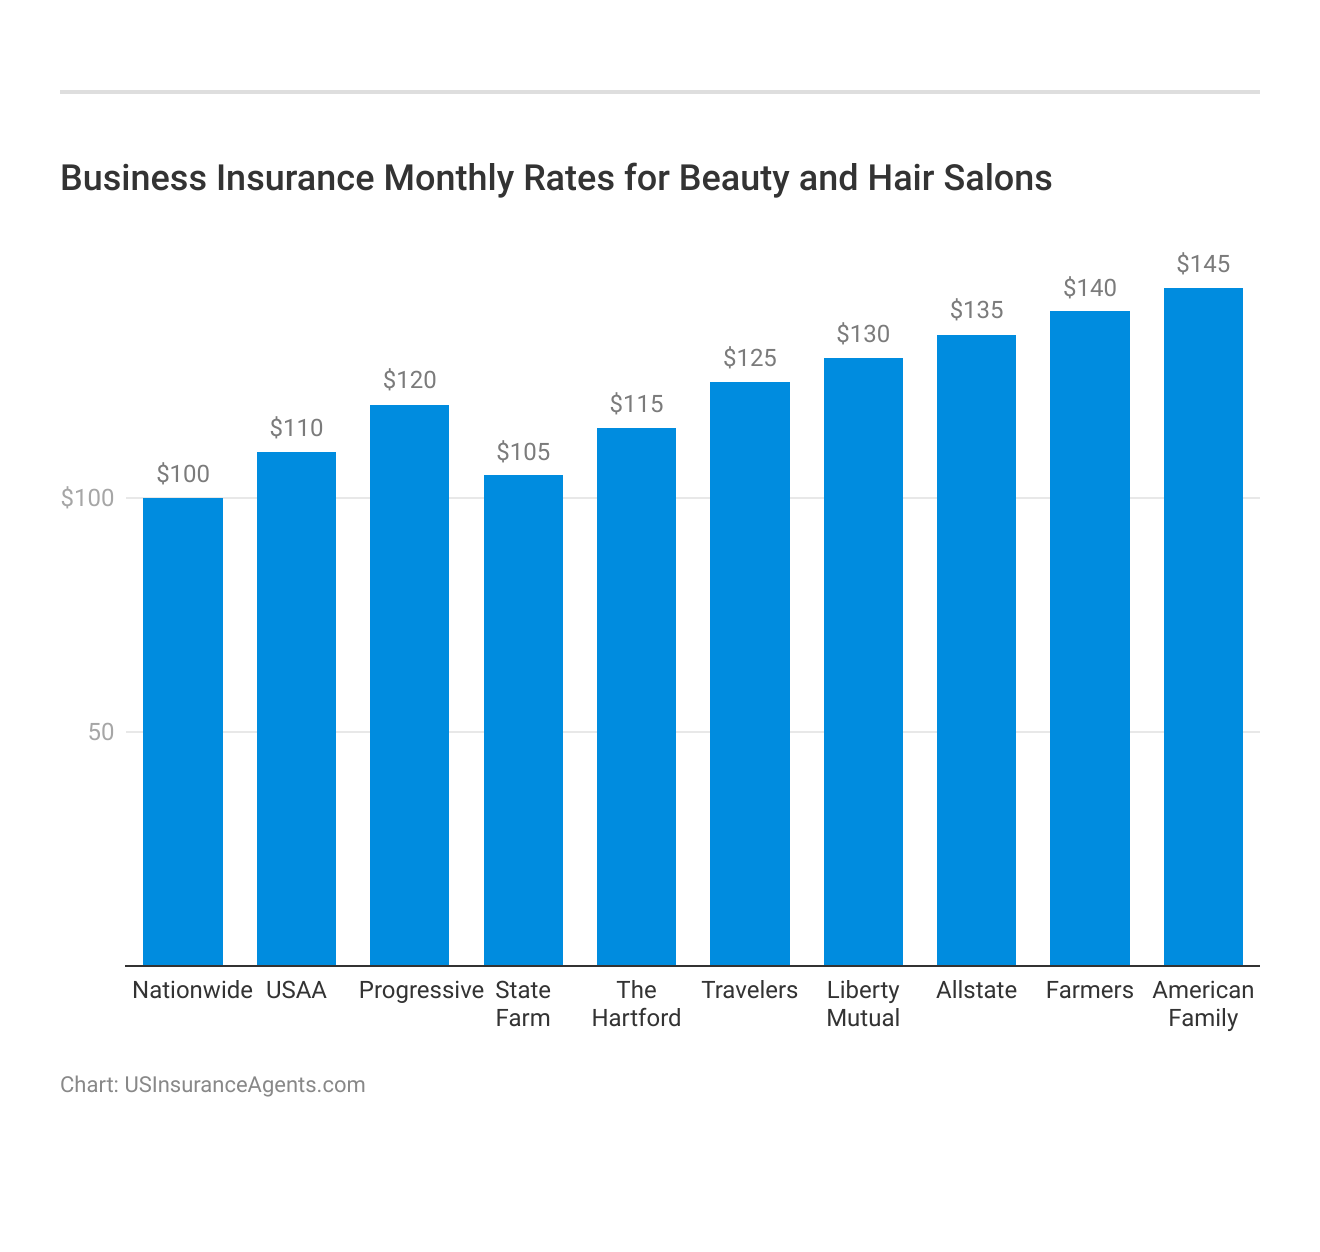 <h3>Business Insurance Monthly Rates for Beauty and Hair Salons</h3>